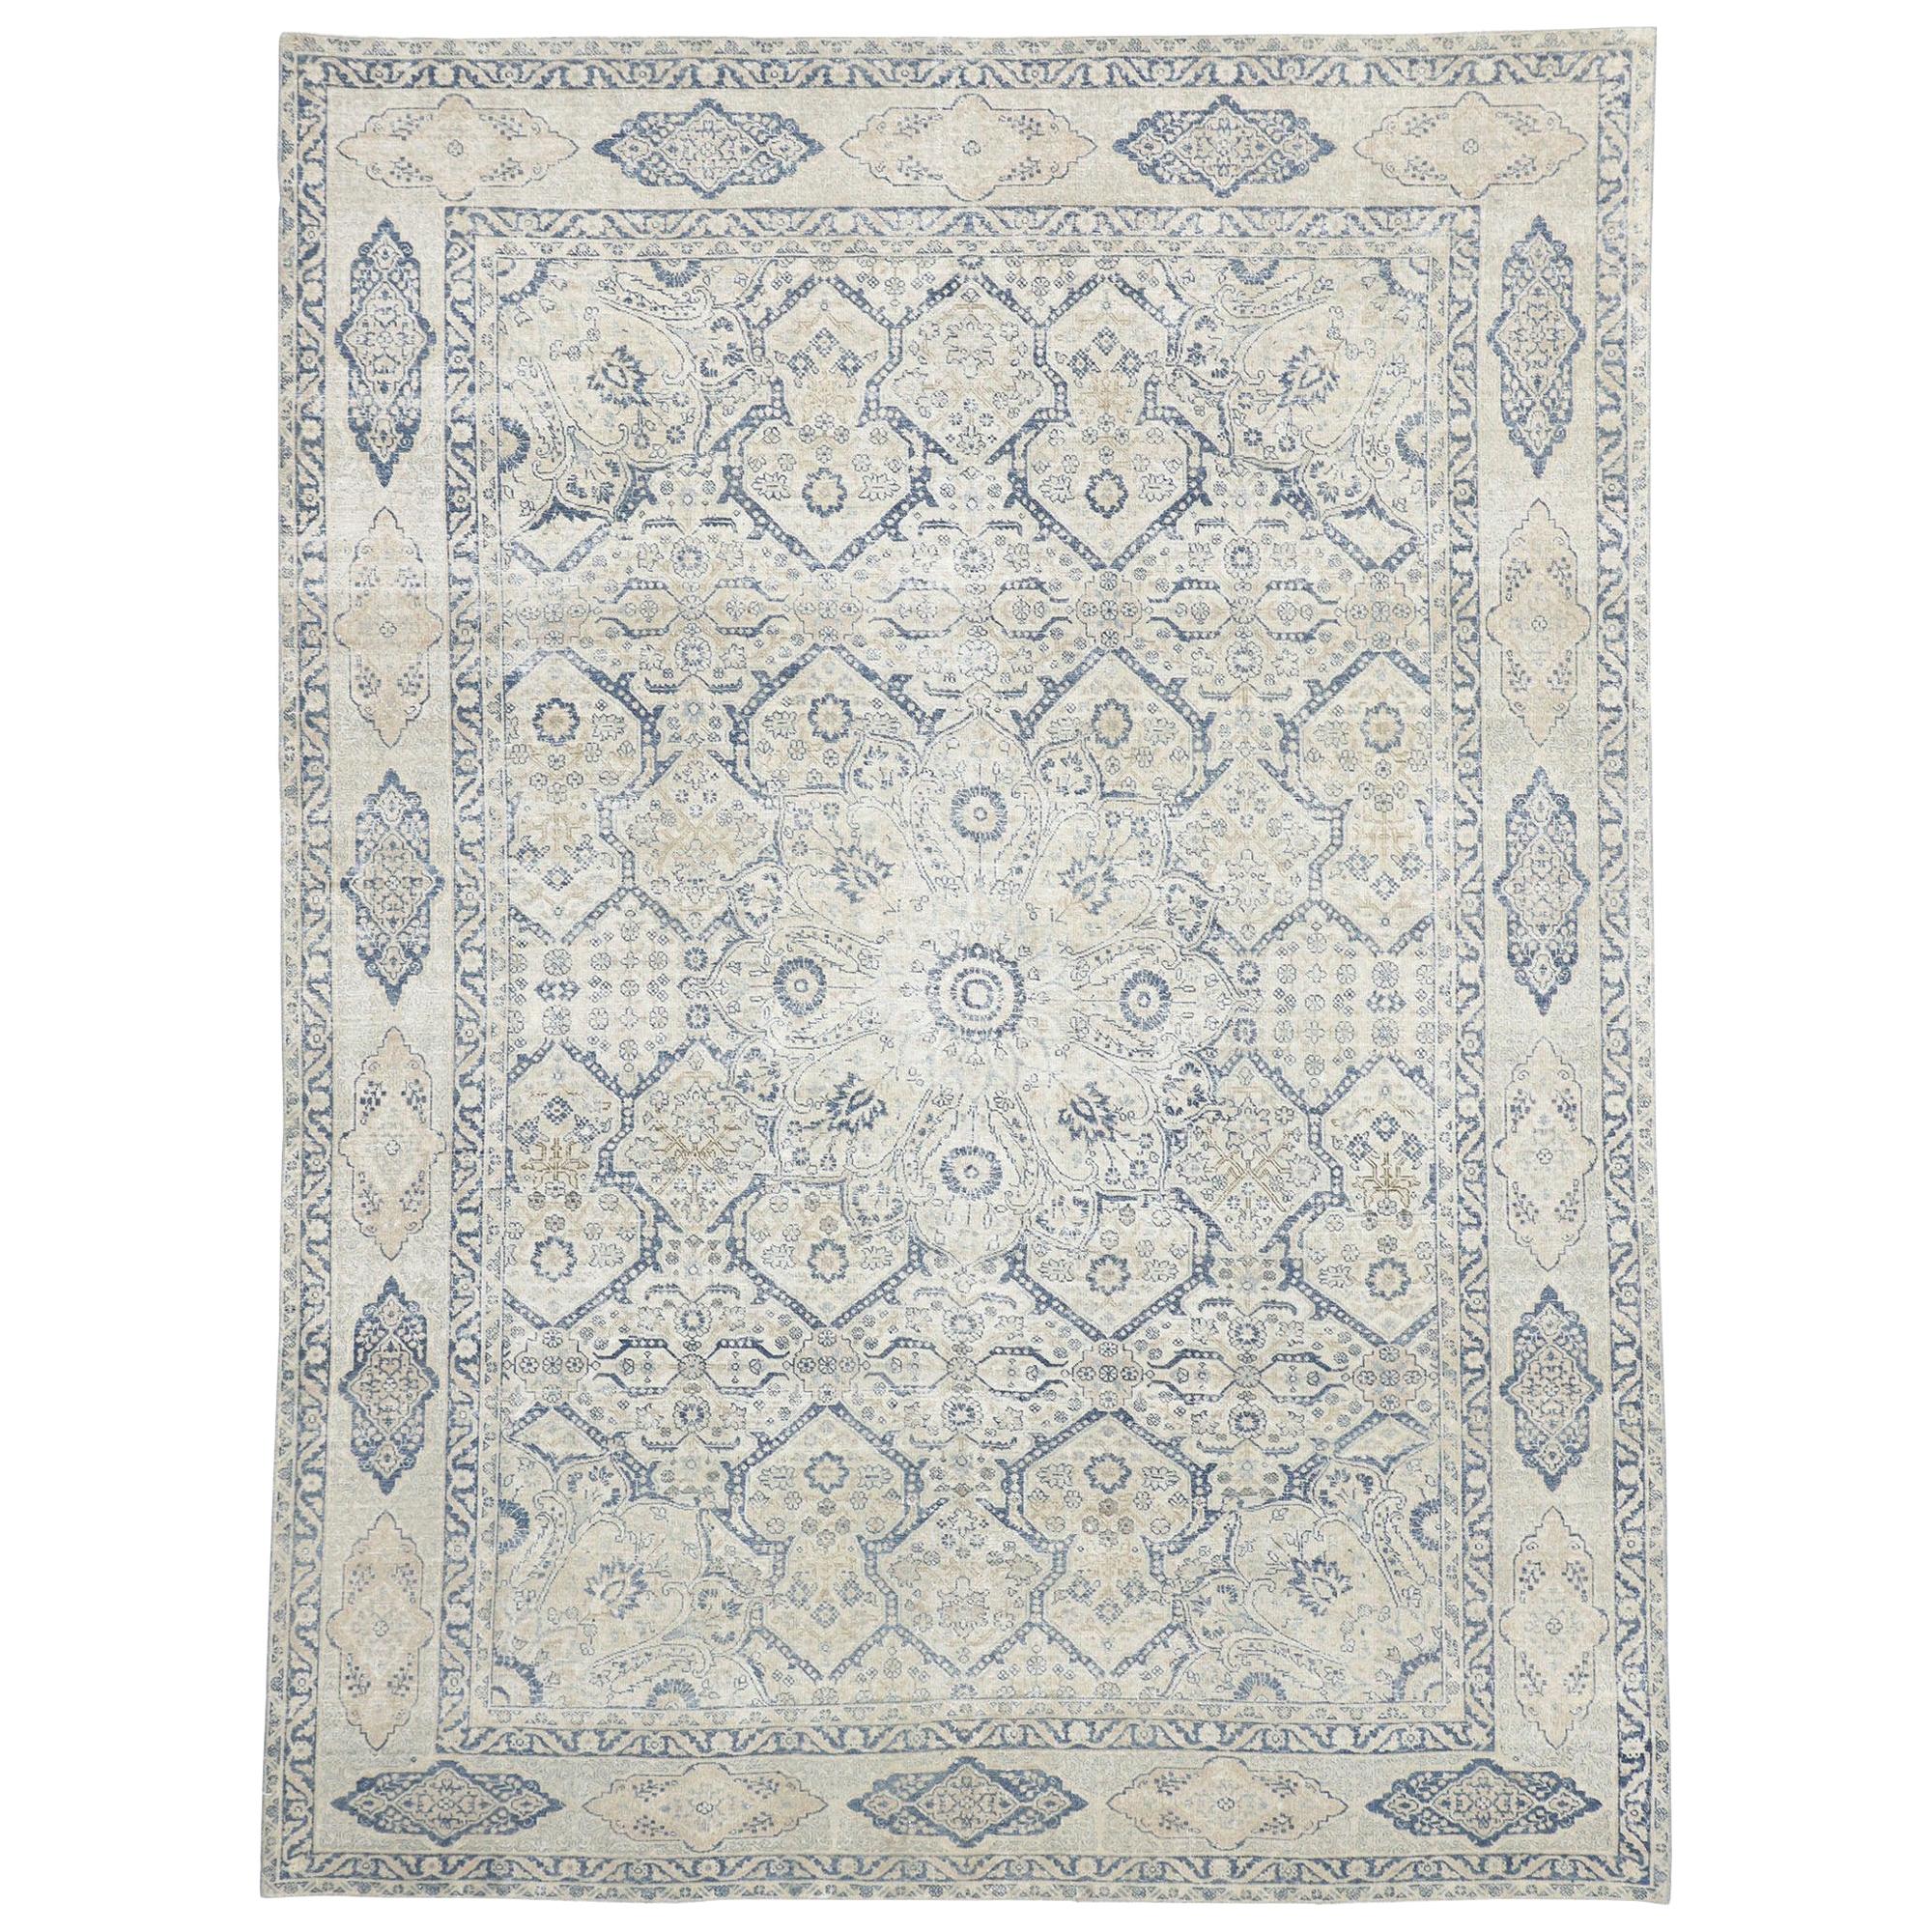 Distressed Antique Turkish Tabriz Rug with Neoclassical Gustavian Style